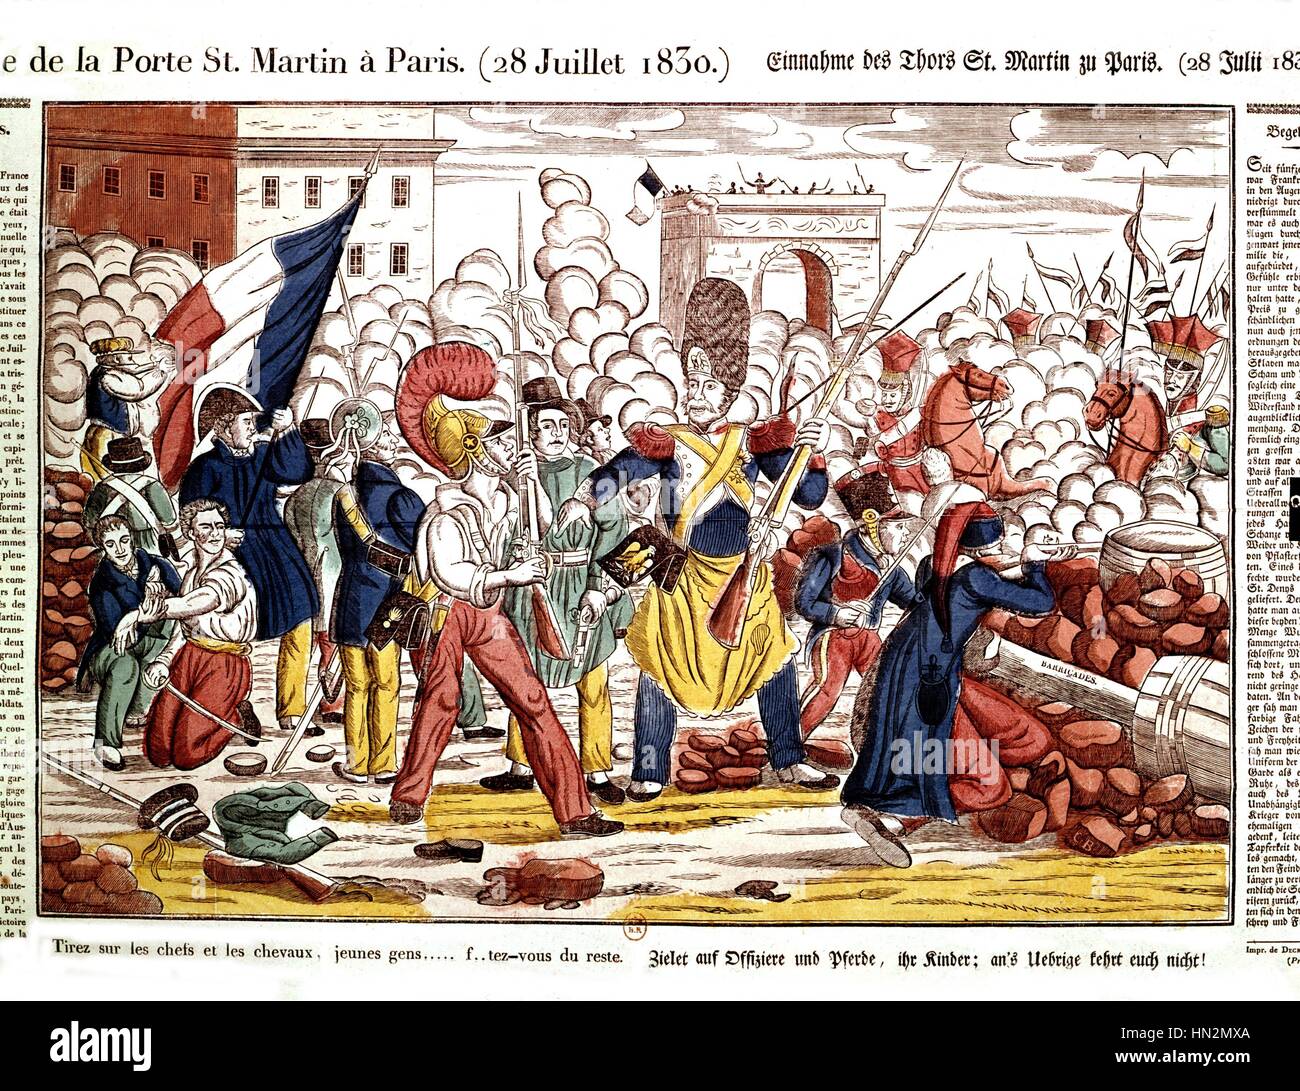 St. Martin's gate barricade in Paris (July 28, 1830) France - 1830 French revolution Stock Photo